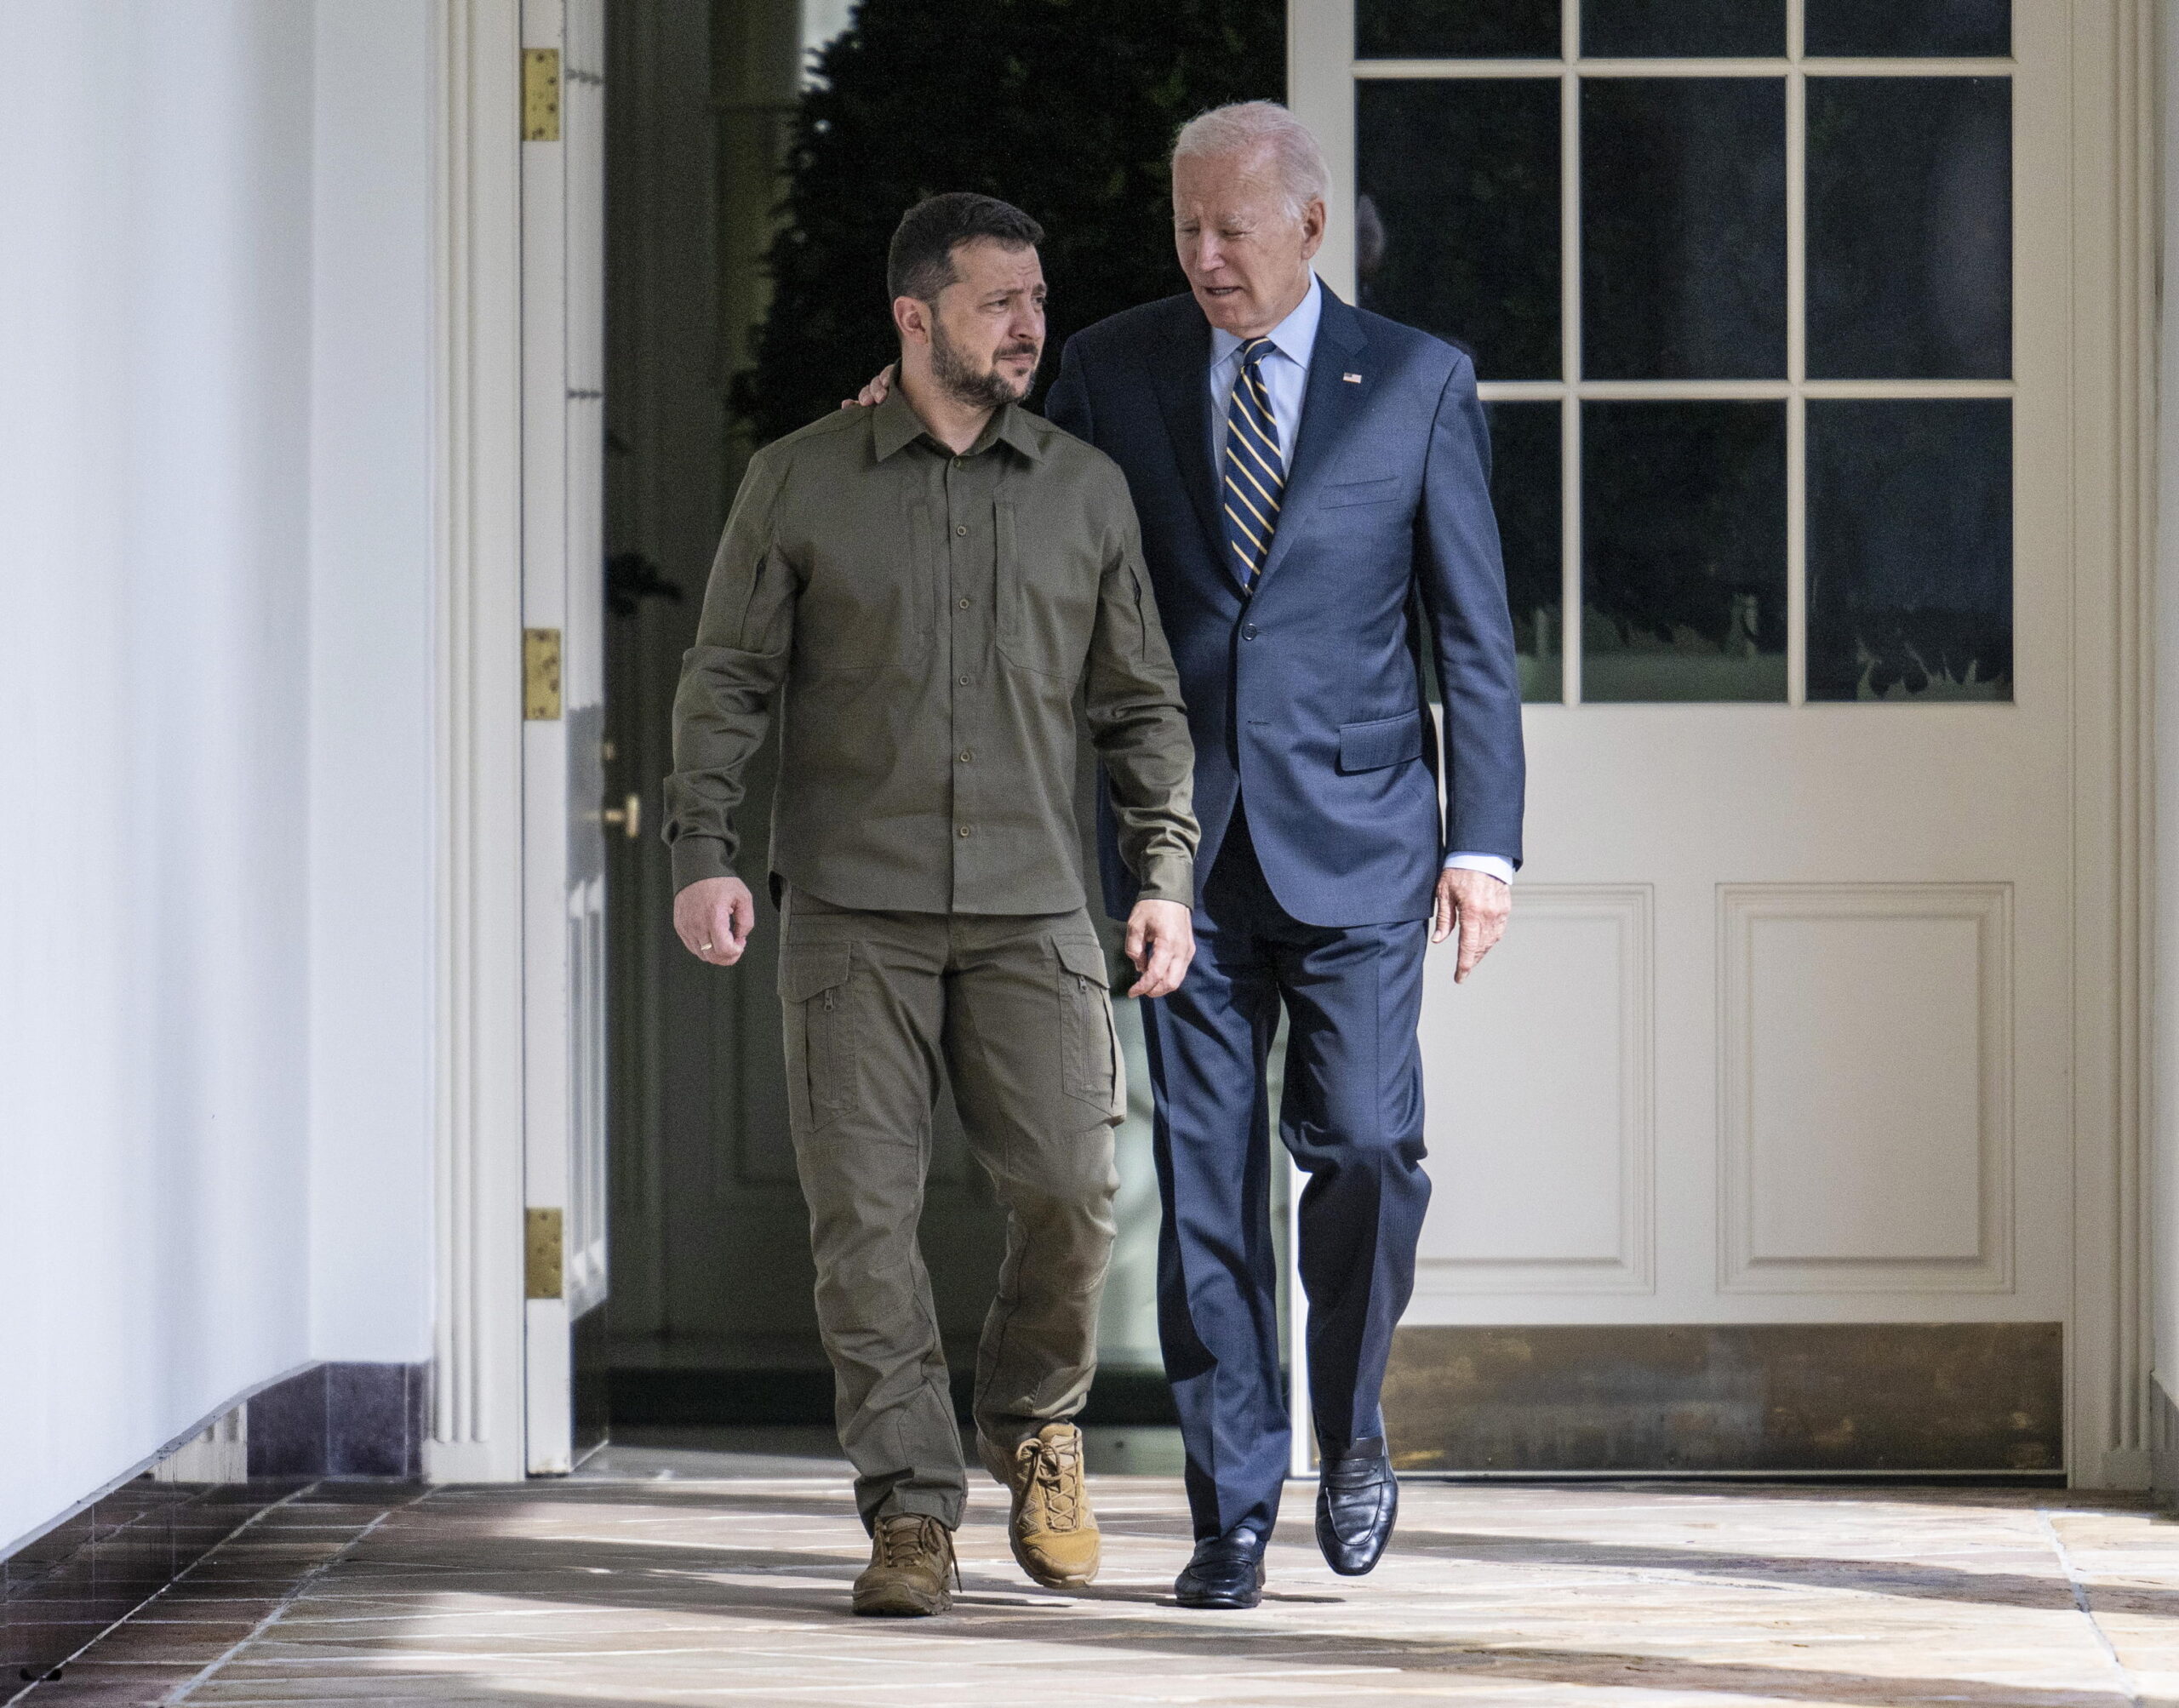 epa10875504 Ukrainian President Volodymyr Zelensky (L) walks down the White House colonnade towards the Oval Office with US President Joe Biden during a visit to the White House in Washington, DC, USA, 21 September 2023. Zelensky is in Washington meeting with members of Congress at the US Capitol, the Pentagon and US President Biden at the White House to make a case for further military aid.  EPA/JIM WATSON / POOL